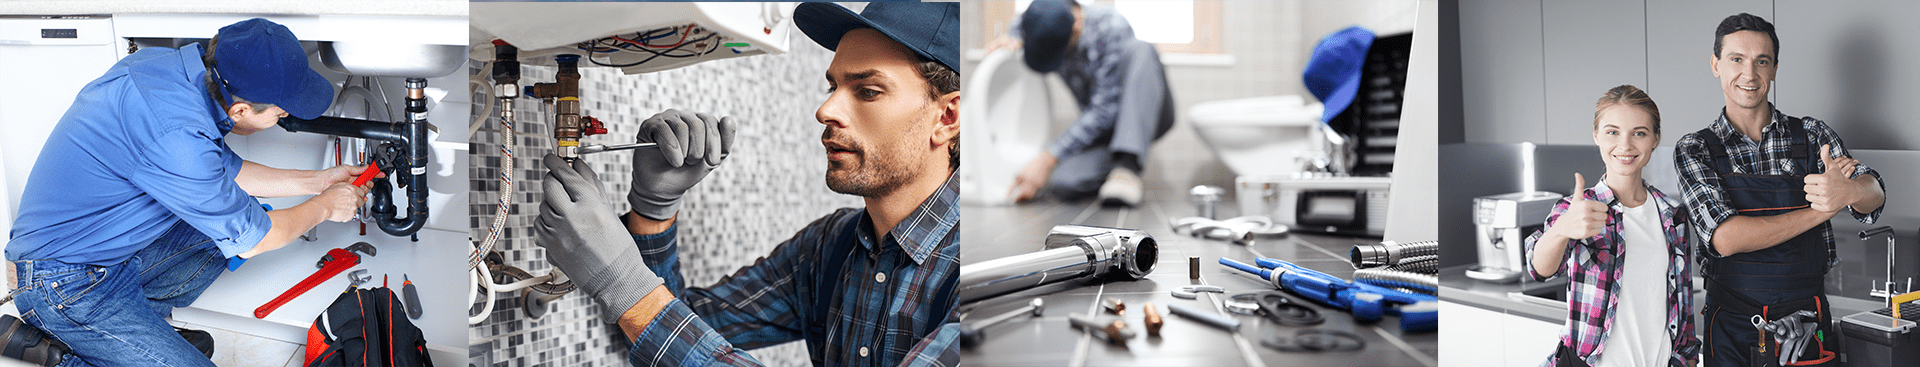 Search Optimization for Plumbers